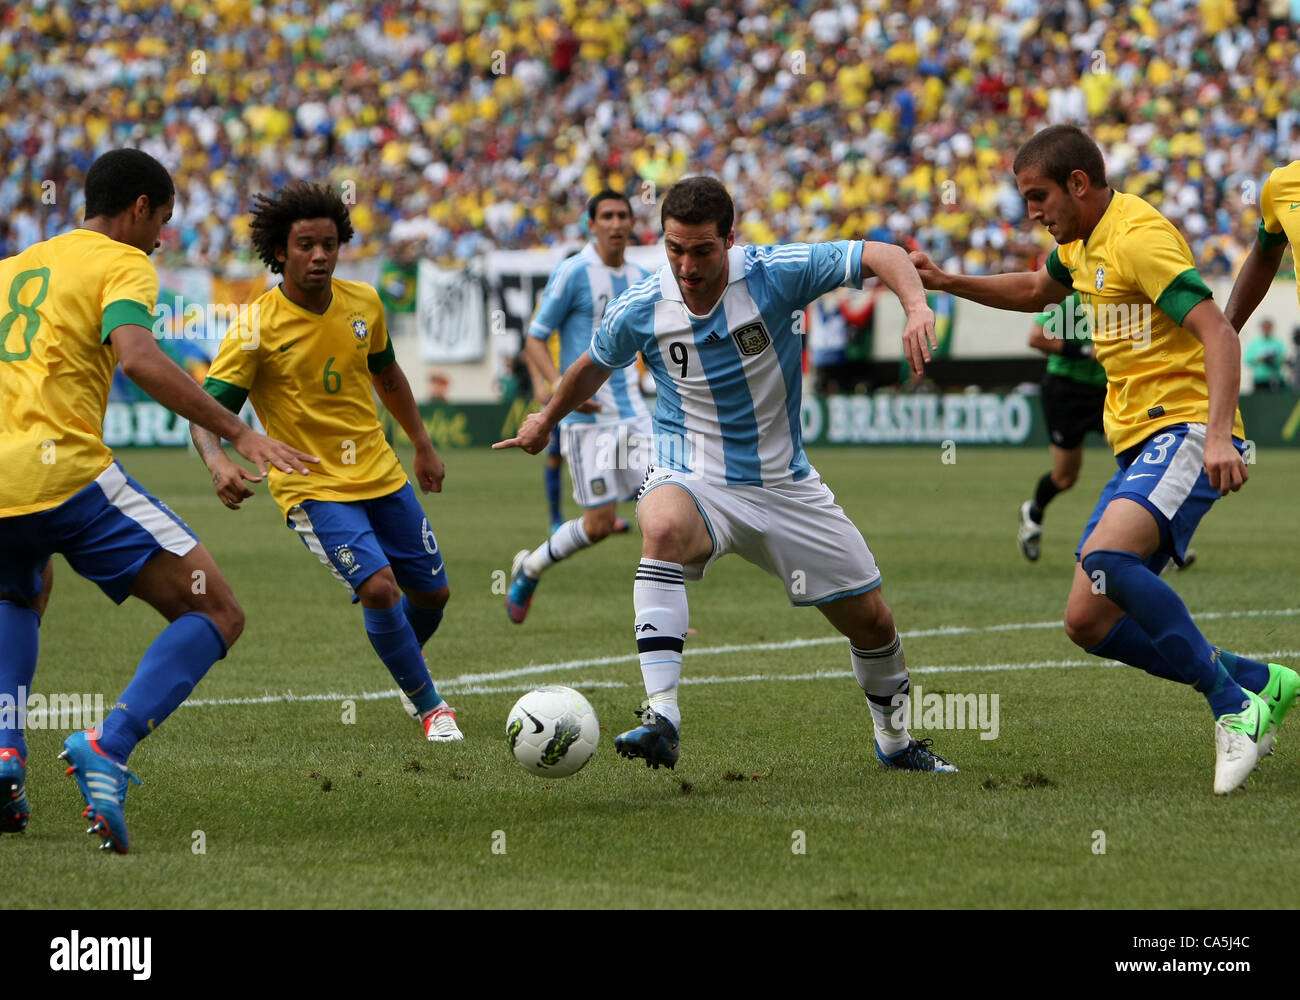 09.06.2012. New Jersey, USA. Gonzalo Higuain (9) of Argentina controls the ball around Romulo (8),Bruno Uvini (13) and Marcelo (6) of Brazil during an international friendly match at Metlife Stadium in East Rutherford,New Jersey. Argentina won 4-3. Stock Photo